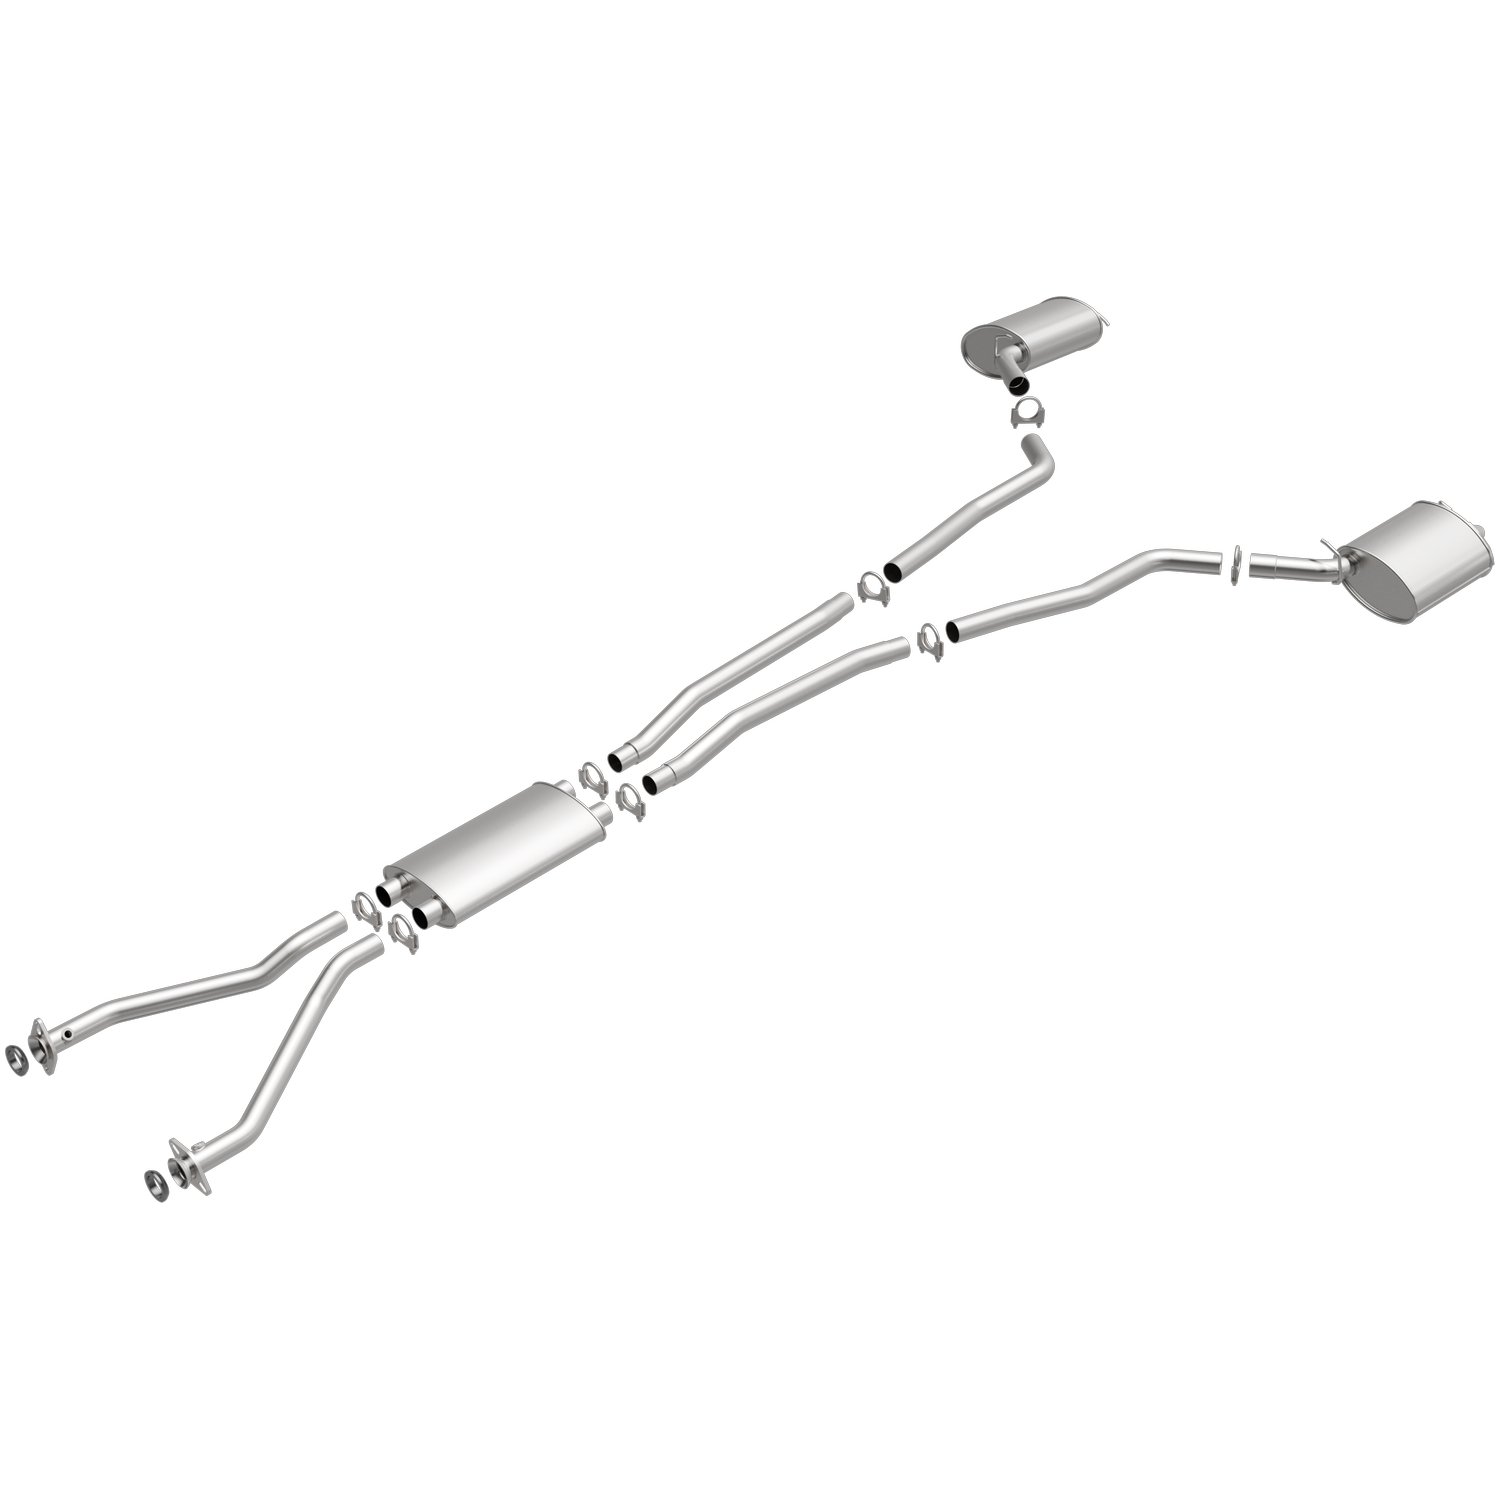 Direct-Fit Exhaust Kit, 2004-2007 Cadillac STS CTS 3.6L